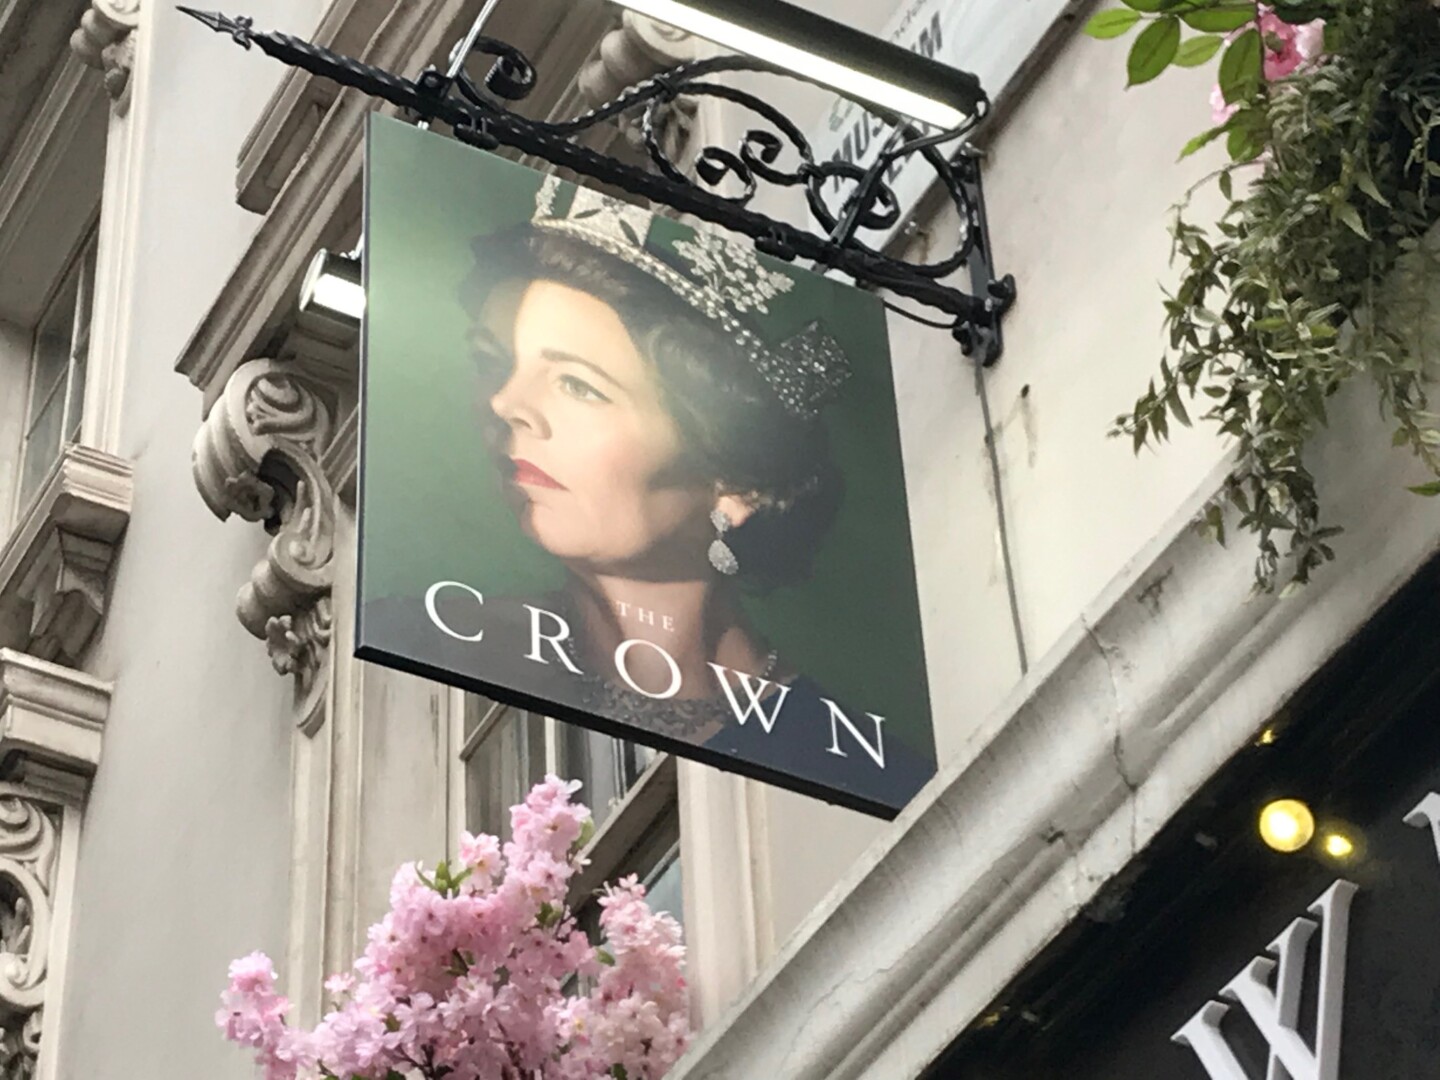 You are currently viewing Largo.ai Analysed the Cast of Netflix Original: the Crown